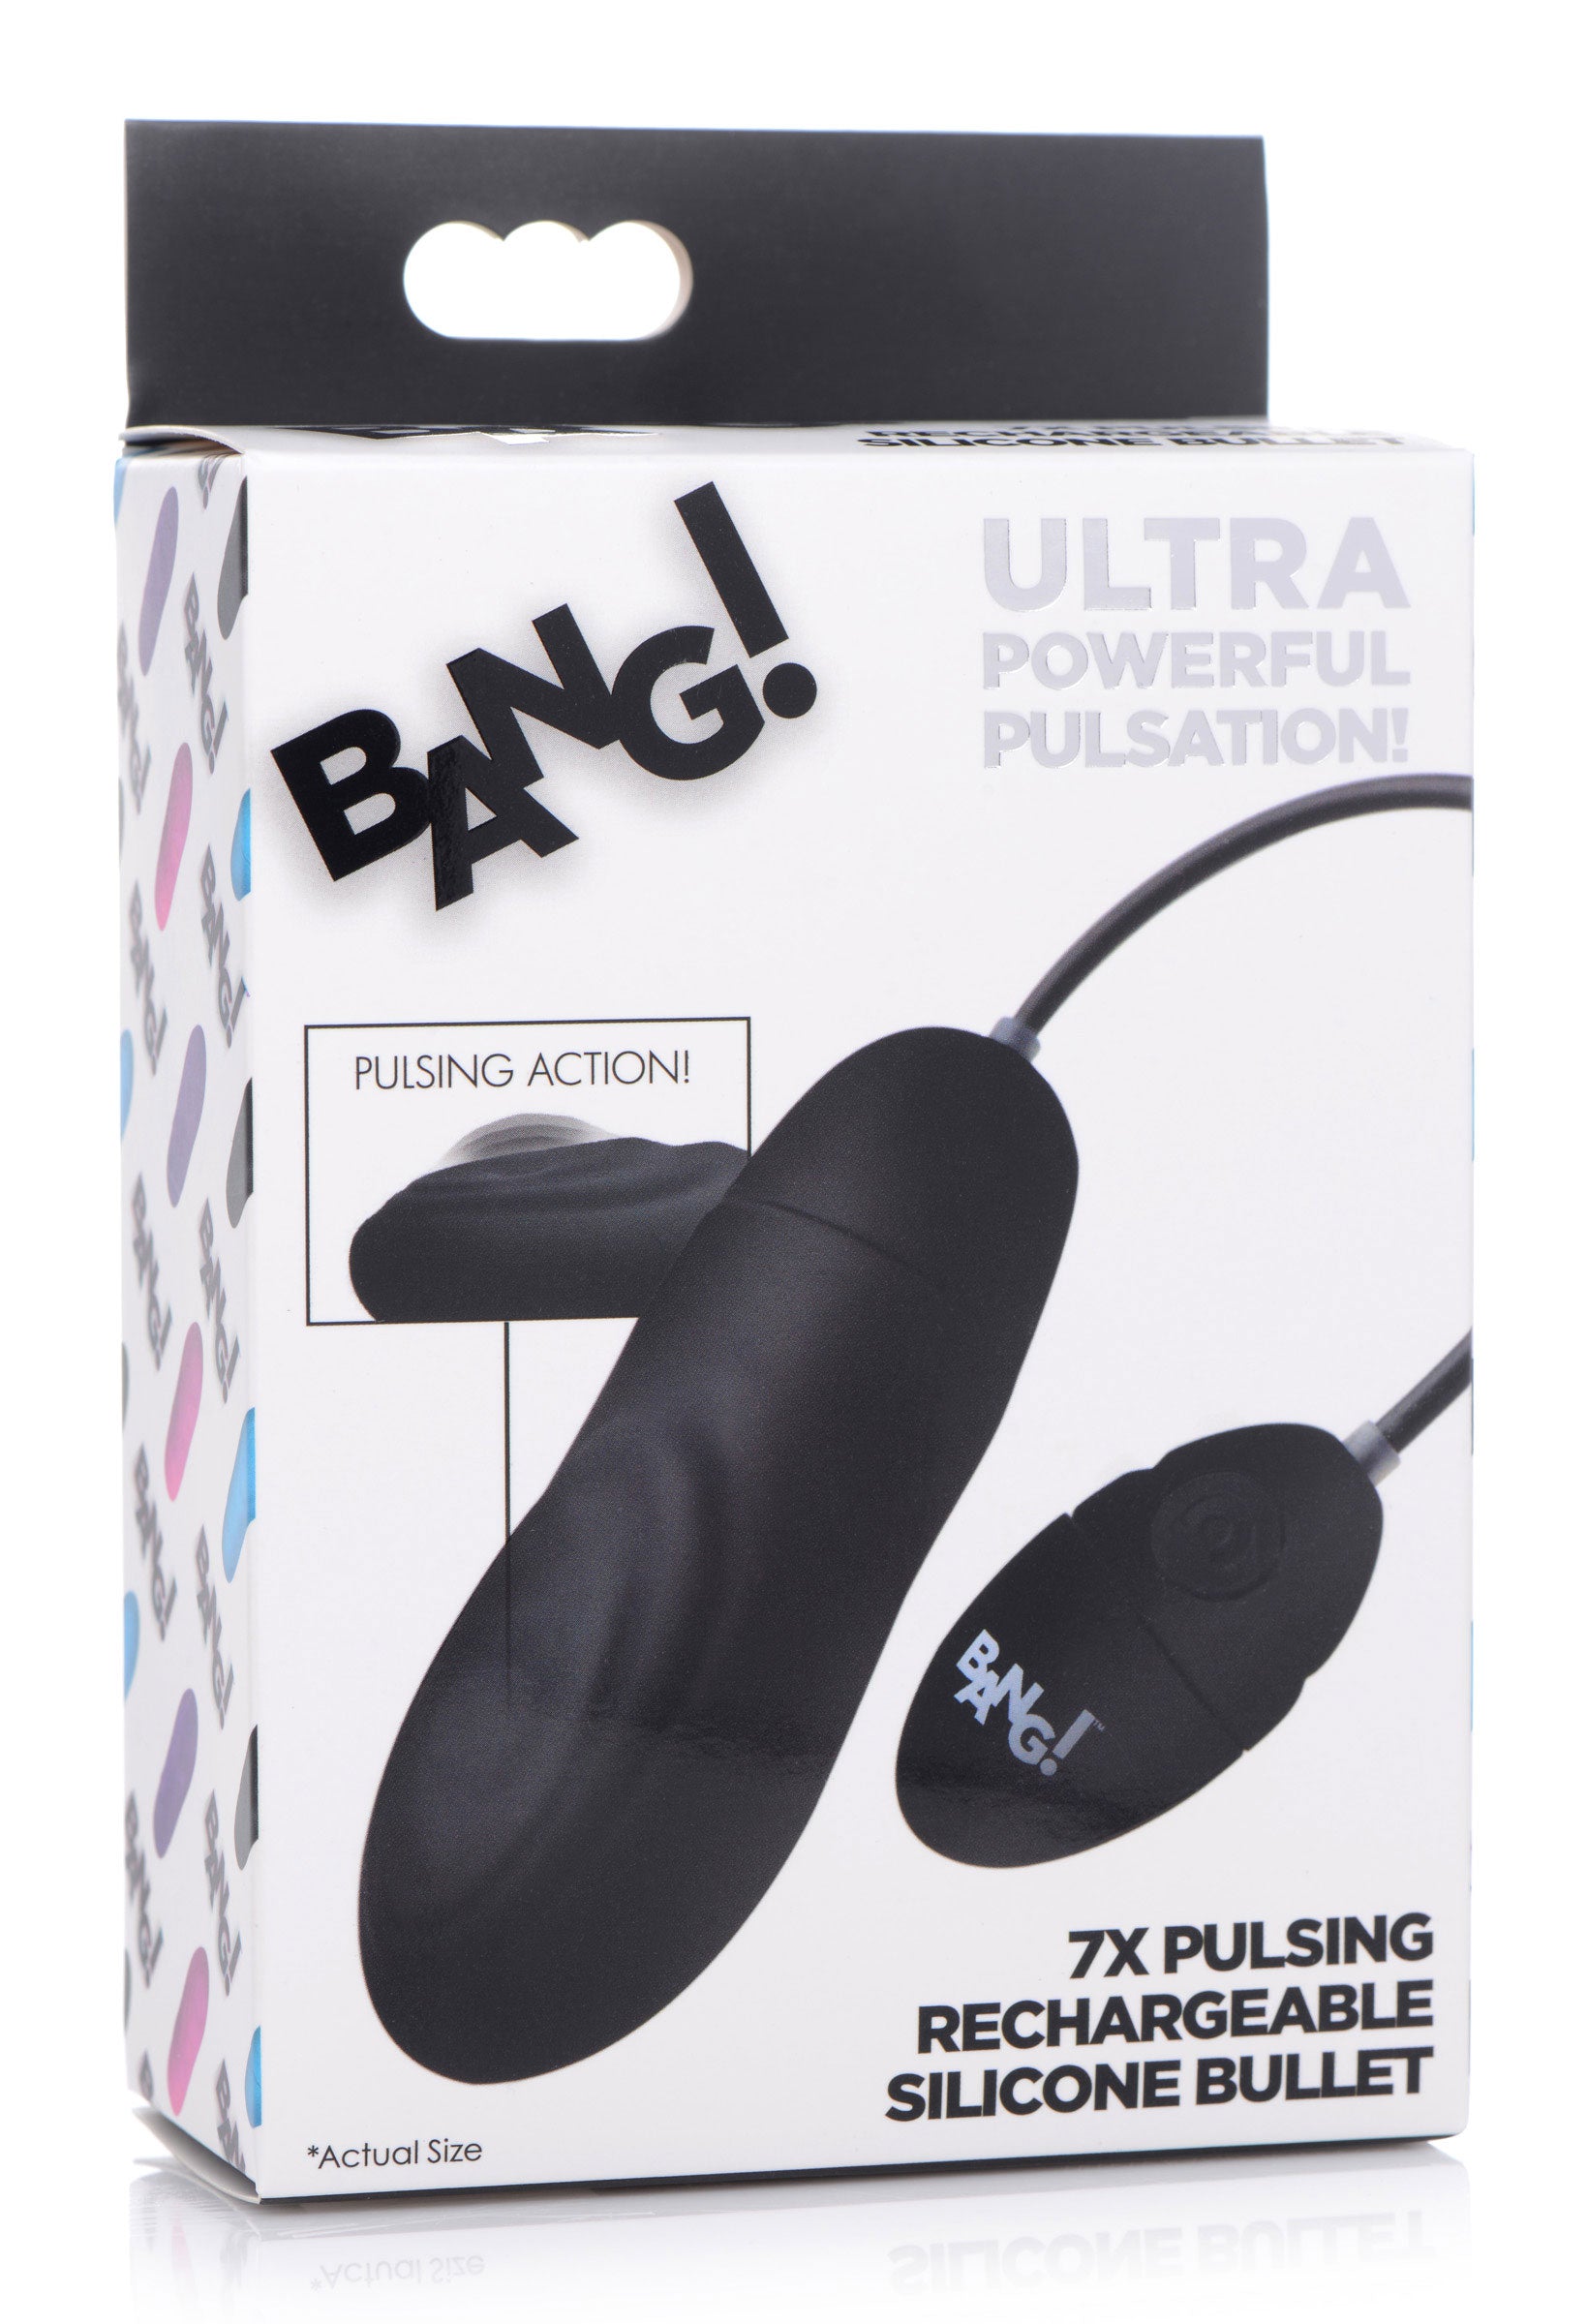 Intense 7x Pulsing Rechargeable Silicone Bullet Black